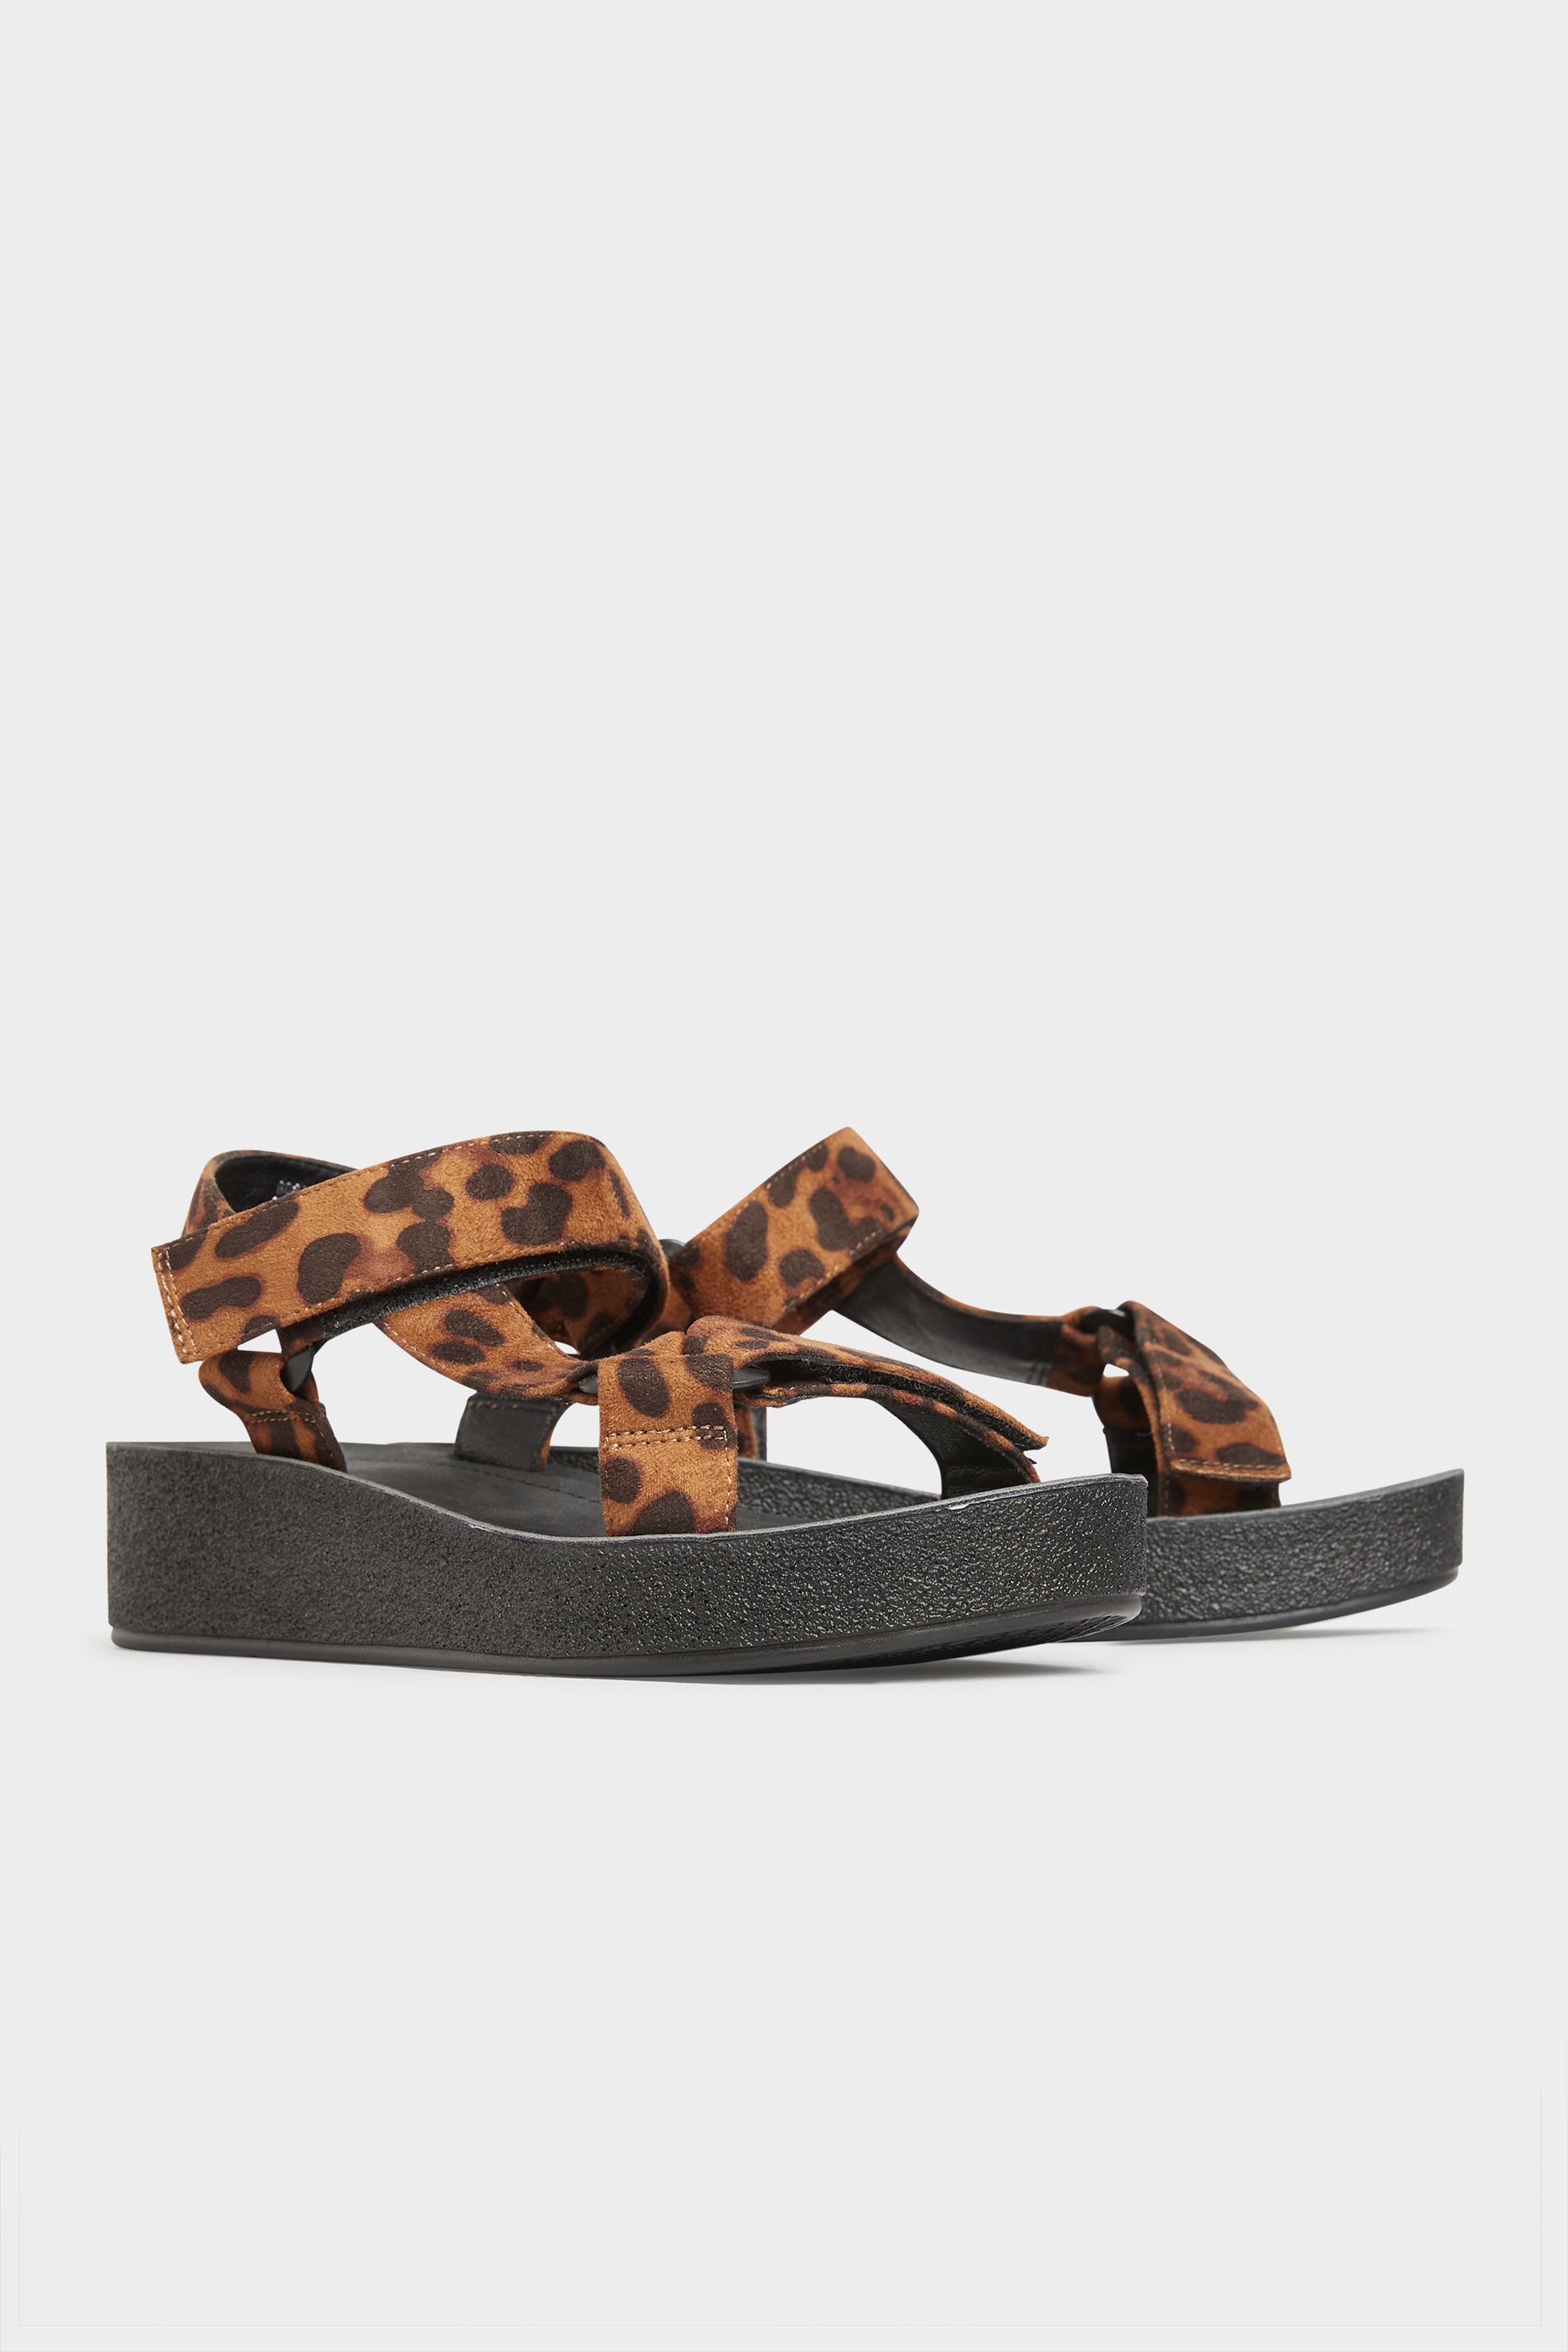 LIMITED COLLECTION Black Leopard Print Sporty Platform Sandals In Extra Wide EEE Fit_B.jpg